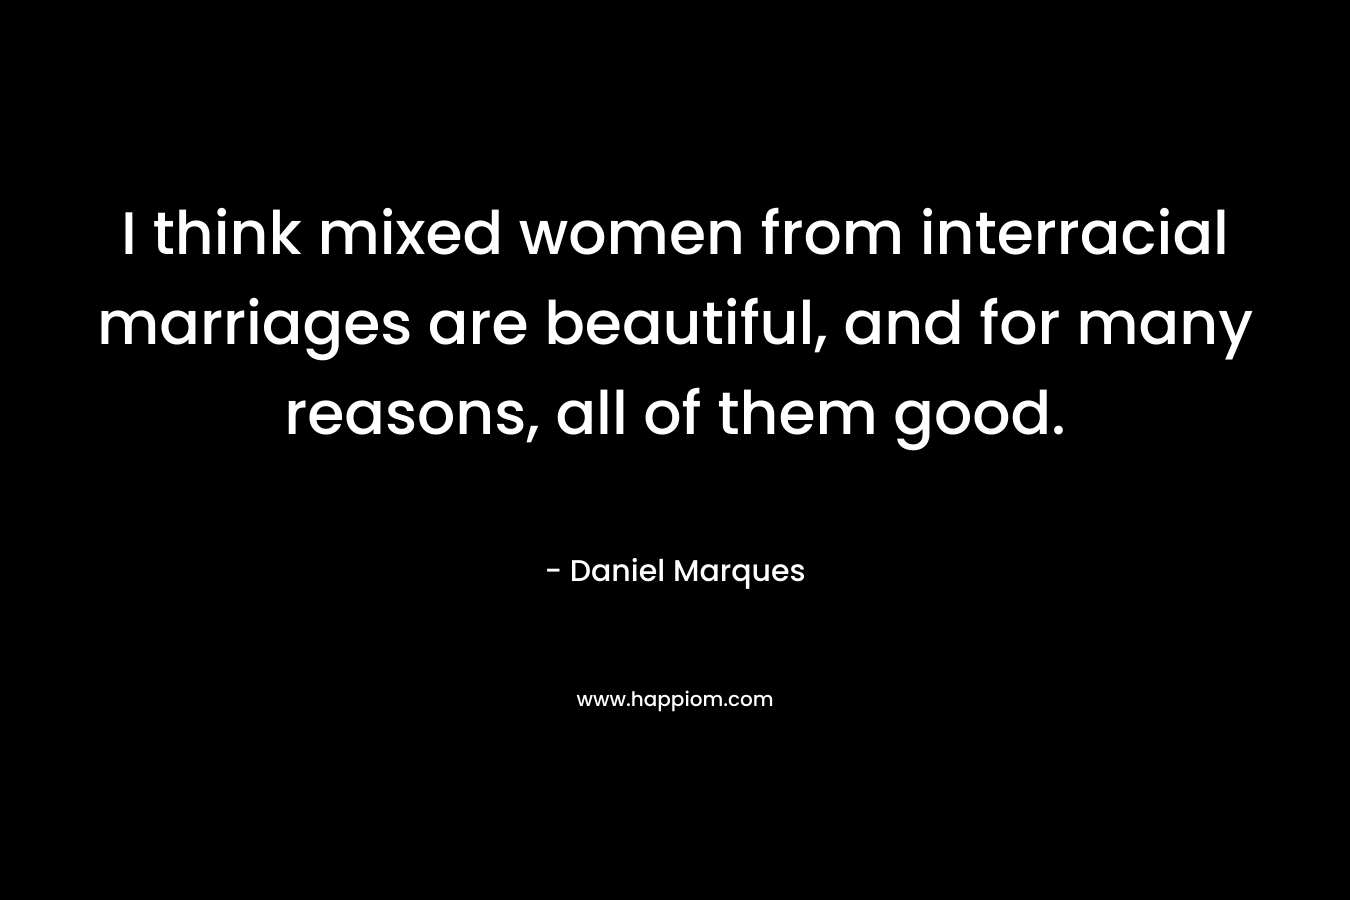 I think mixed women from interracial marriages are beautiful, and for many reasons, all of them good. – Daniel Marques